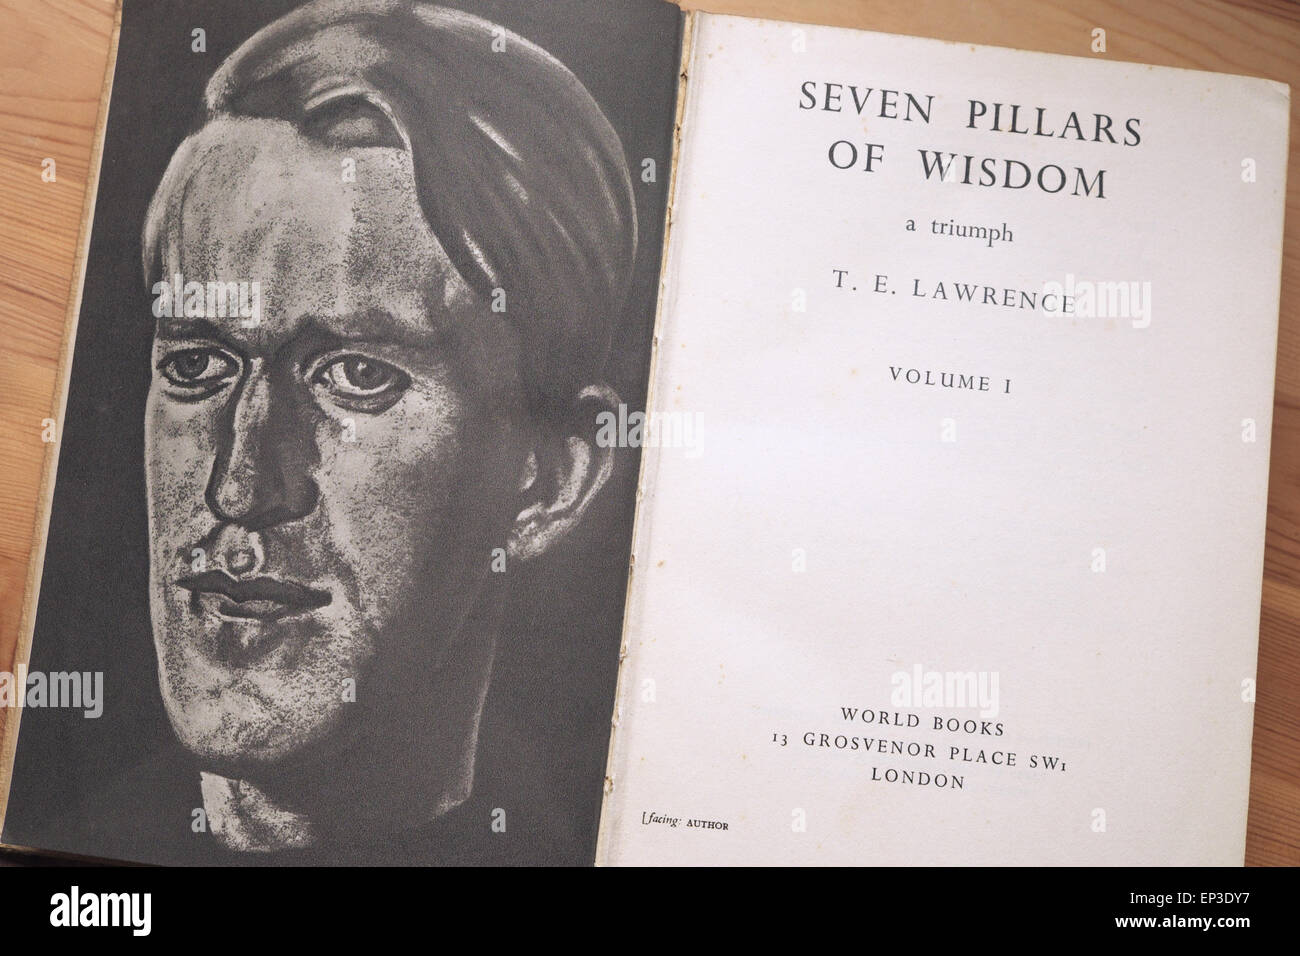 Seven Pillars of Wisdom by  T E Lawrence autobiography book edition published by World Books in 1939. Stock Photo